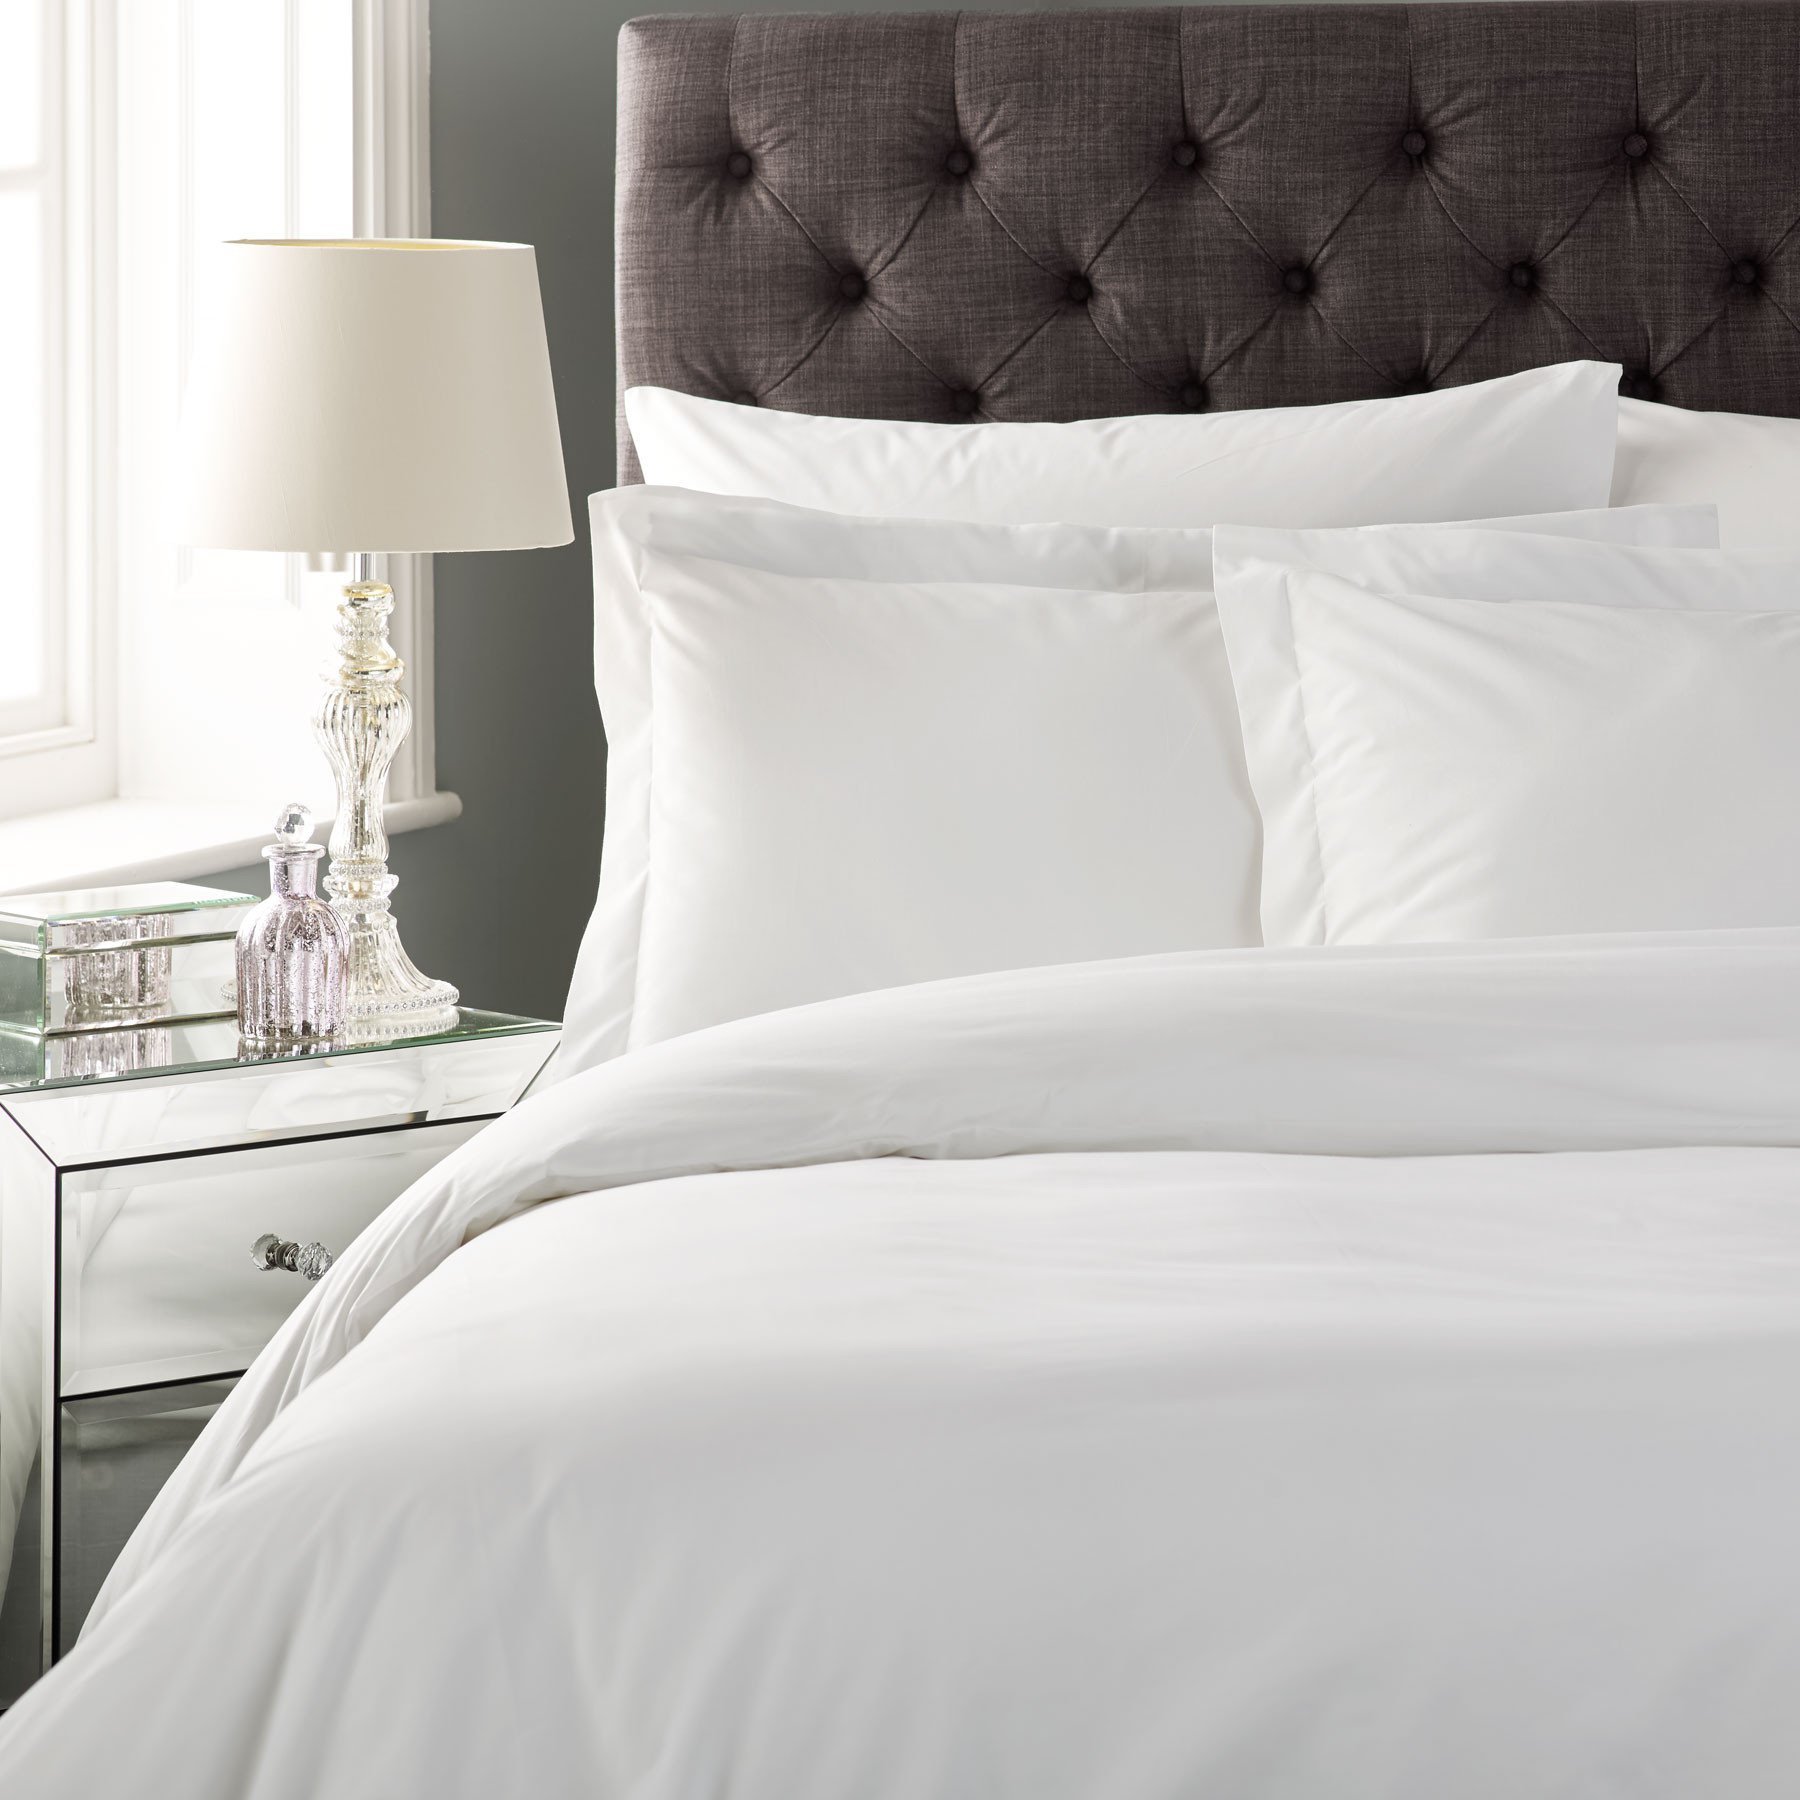 Exclusive real single-ply bed linen - white or light cream ... NFCLONW